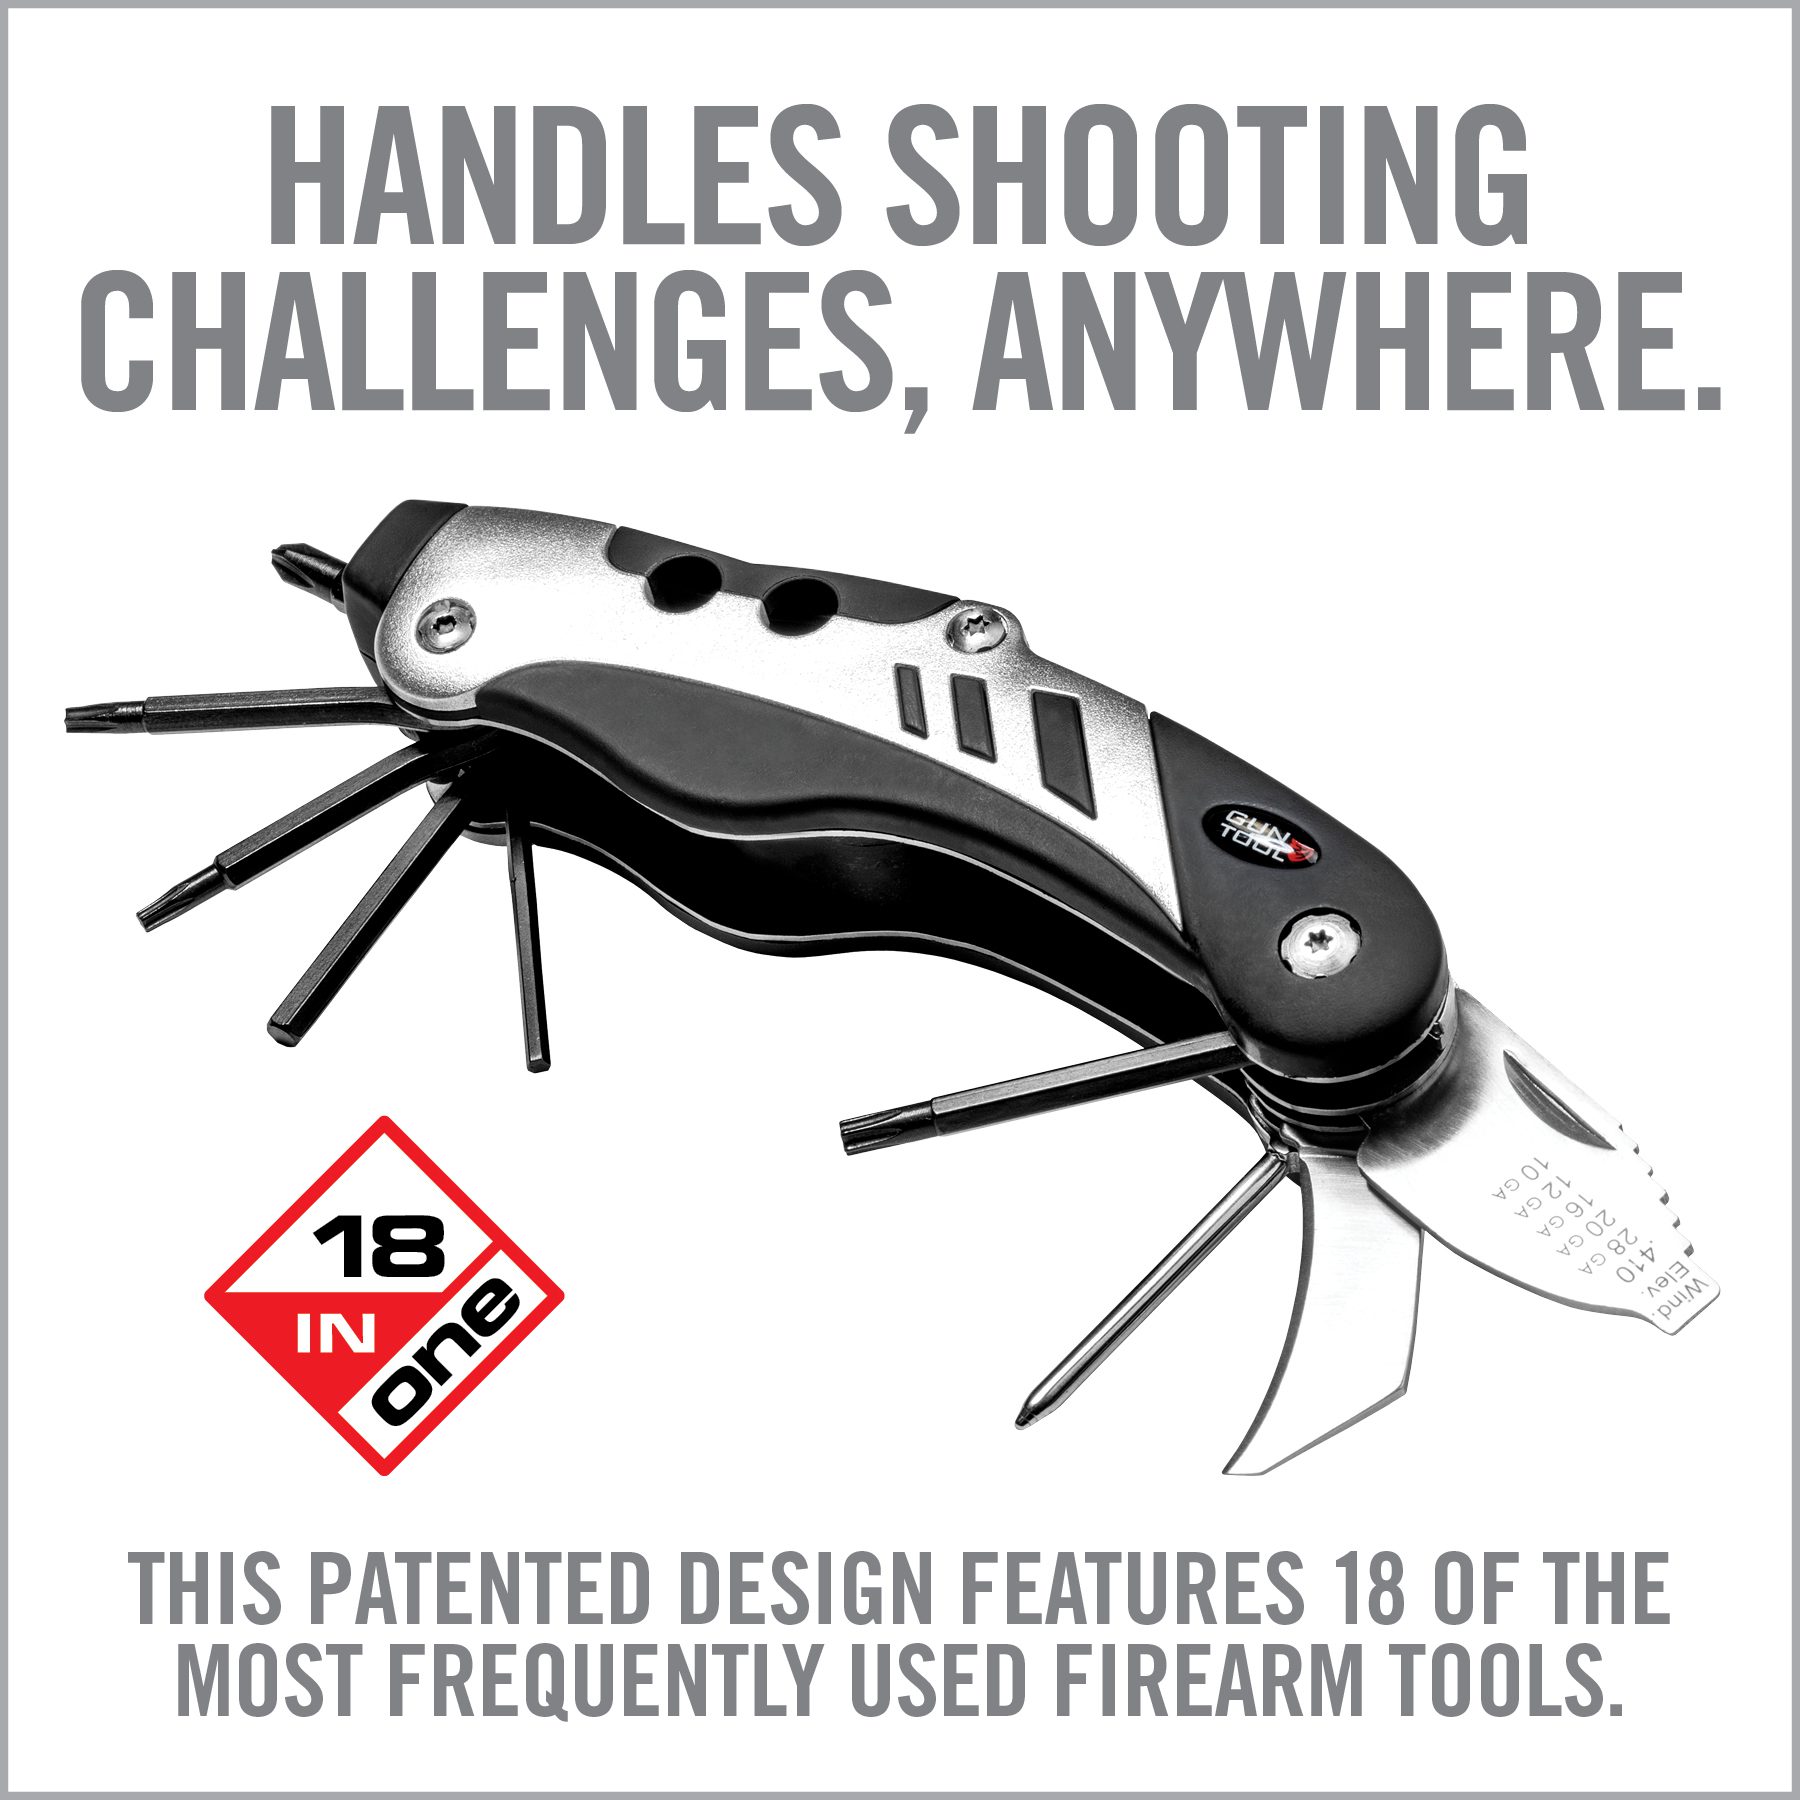 an advertisement for a swiss army knife